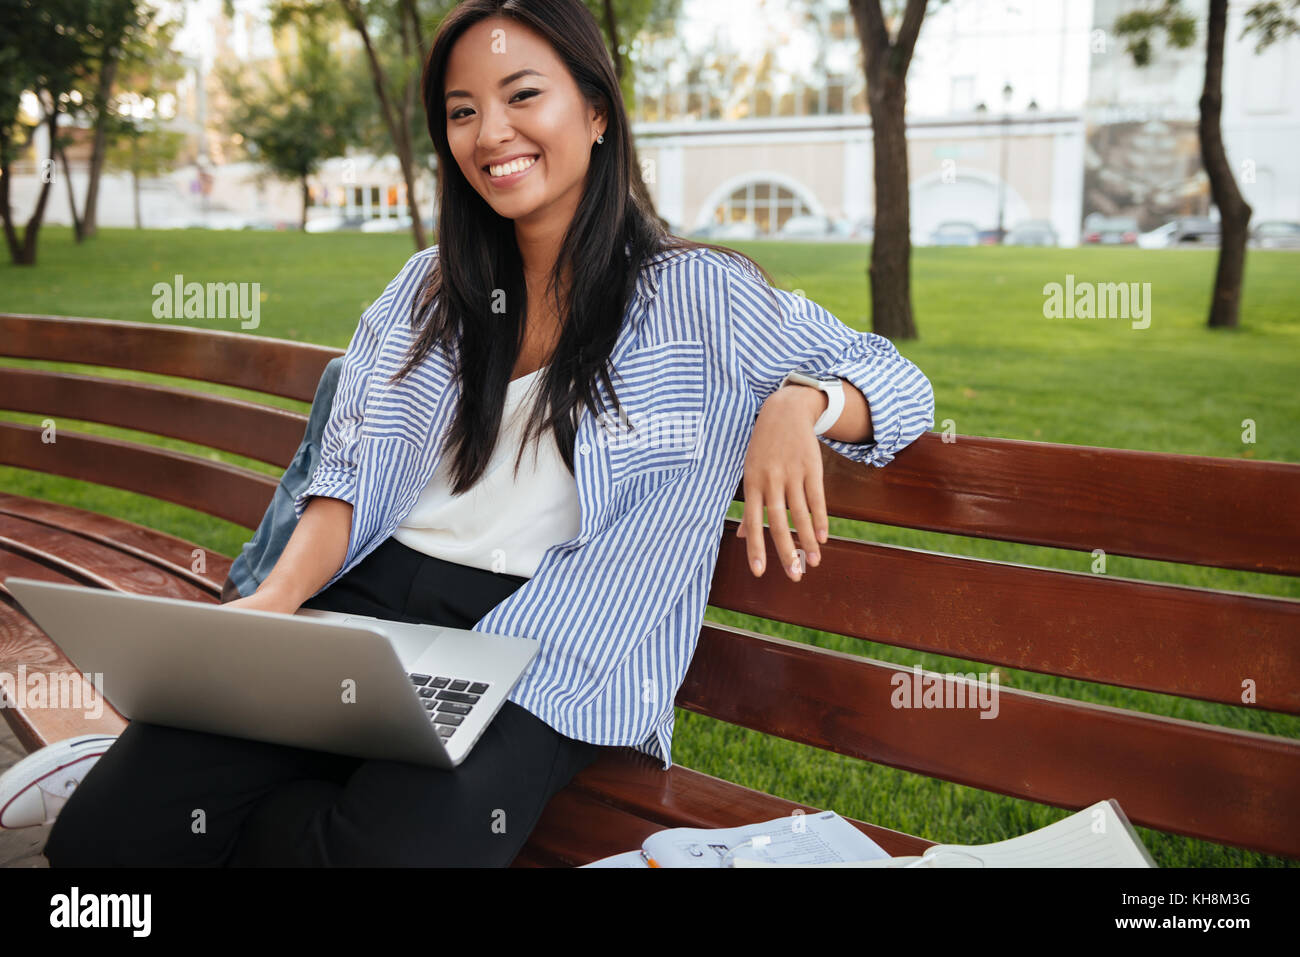 Portrait of laughing pretty asian woman, relaxing in park with laptop, looking at camera Stock Photo